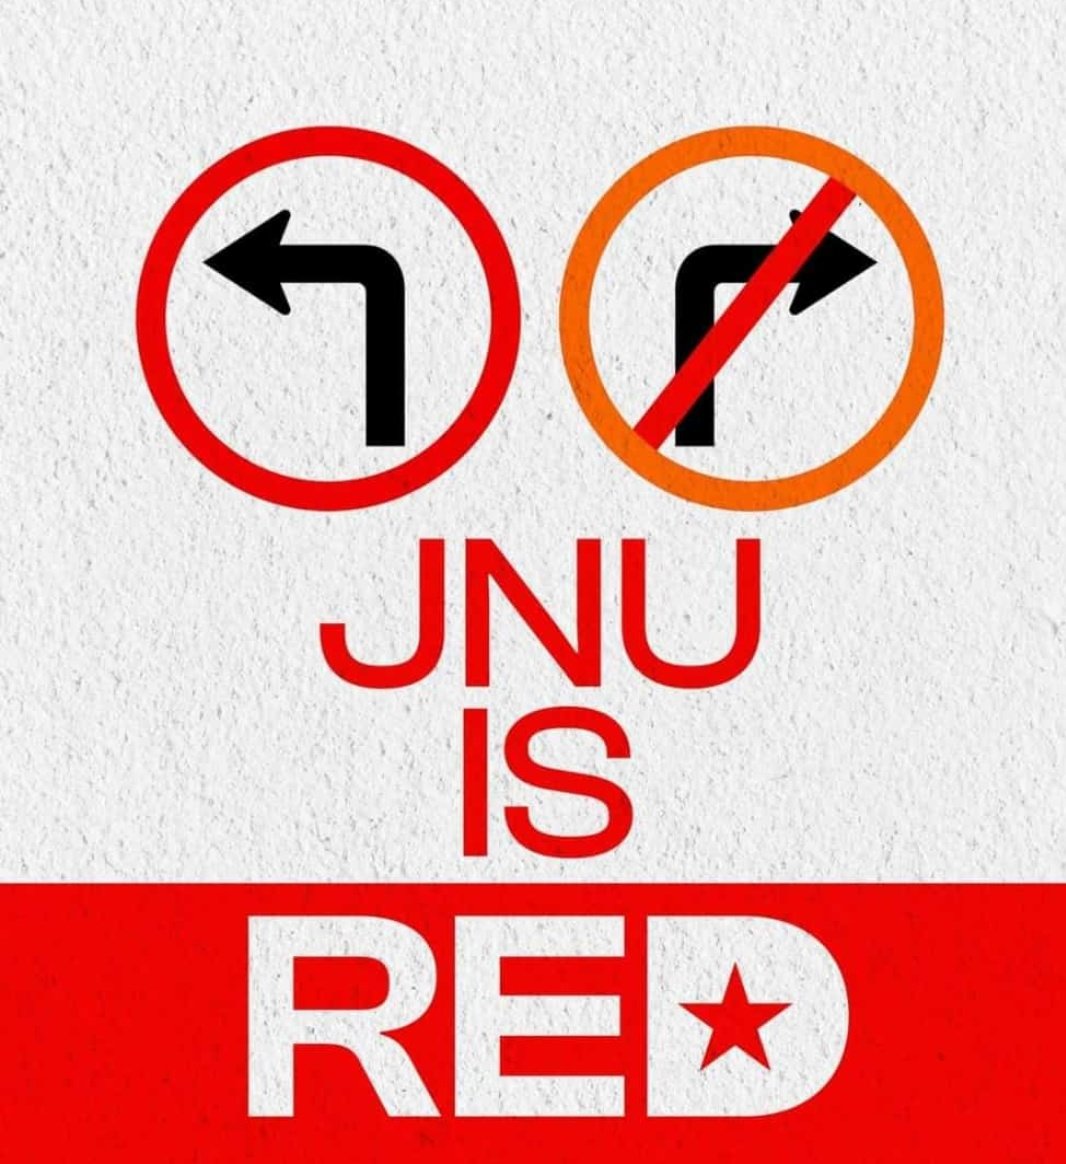 The next station is JNU, the door opens on the LEFT ❤️✊🏾

#JNUSUElection